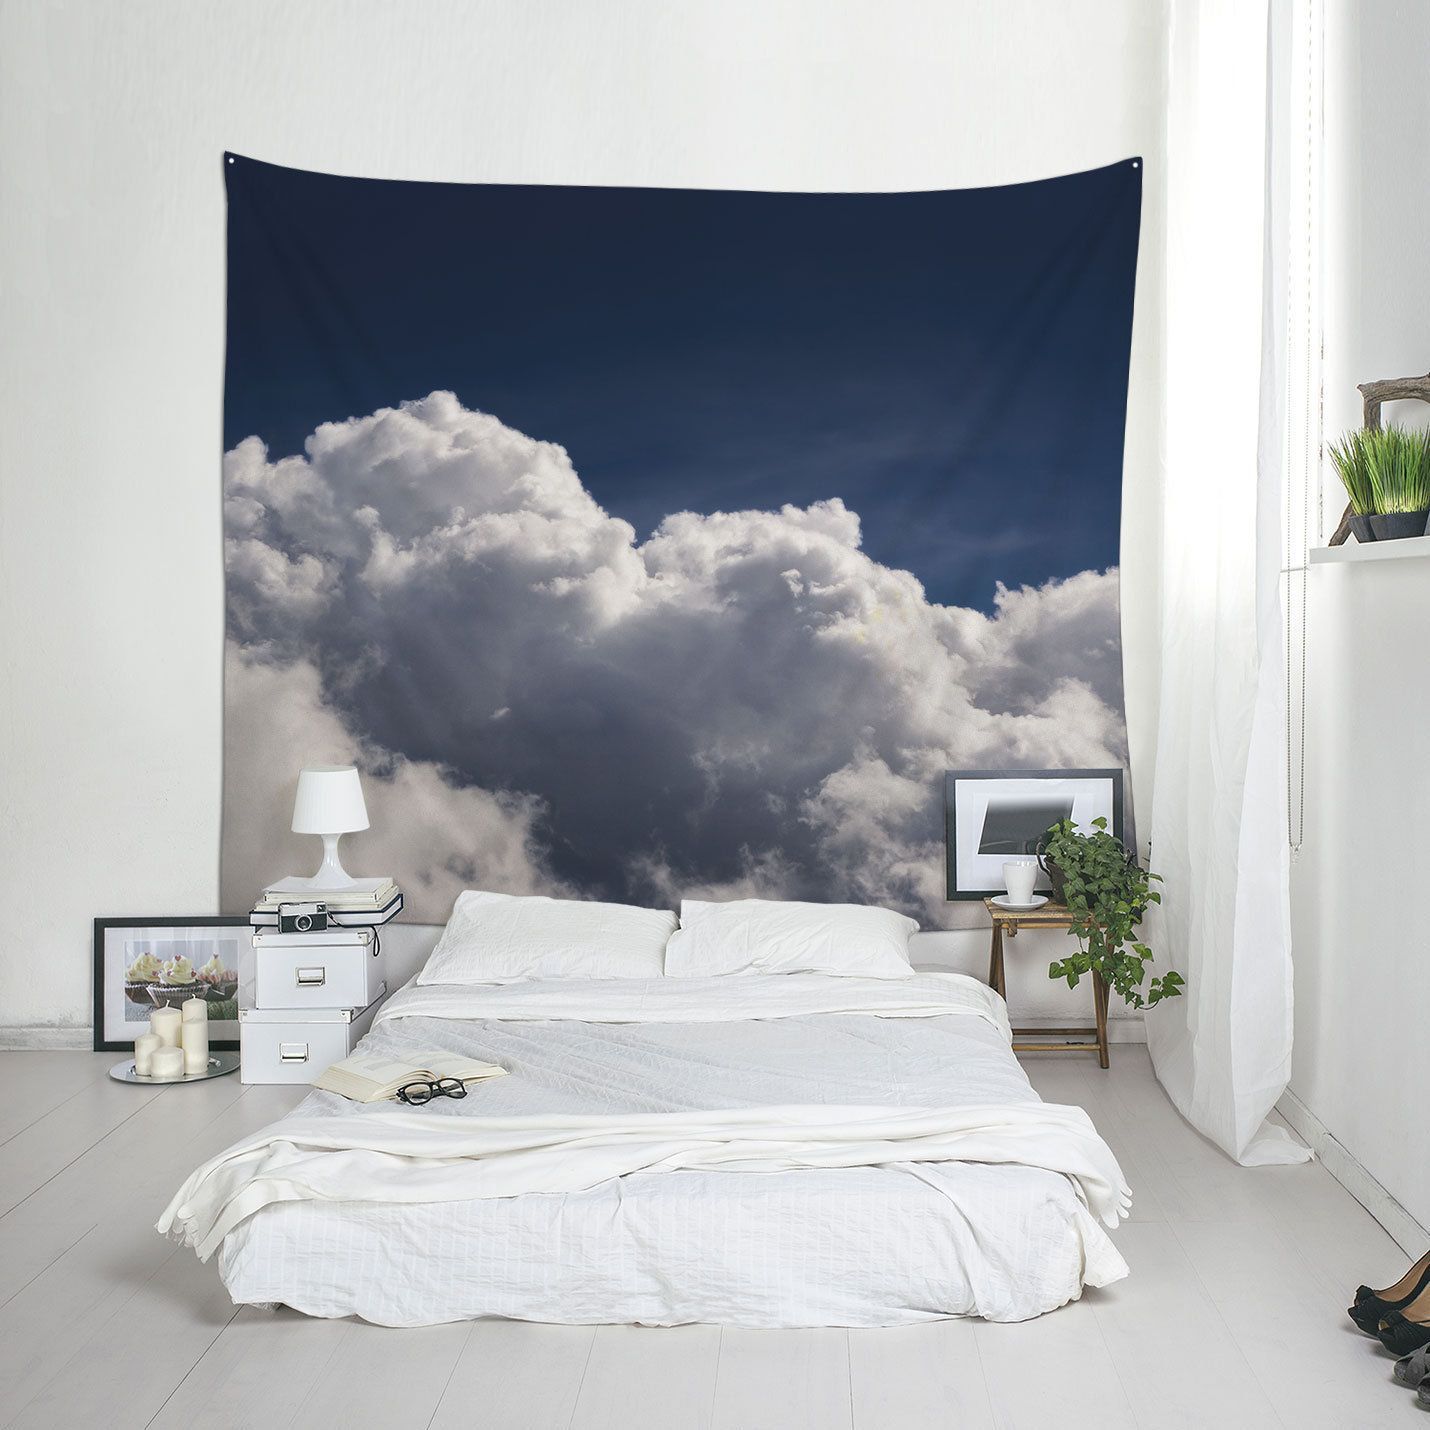 Cloudscape Tapestry Under A Navy Blue Sky Dorm Wall Art Or Regarding 2017 Blended Fabric Ranier Wall Hangings With Hanging Accessories Included (Gallery 17 of 20)